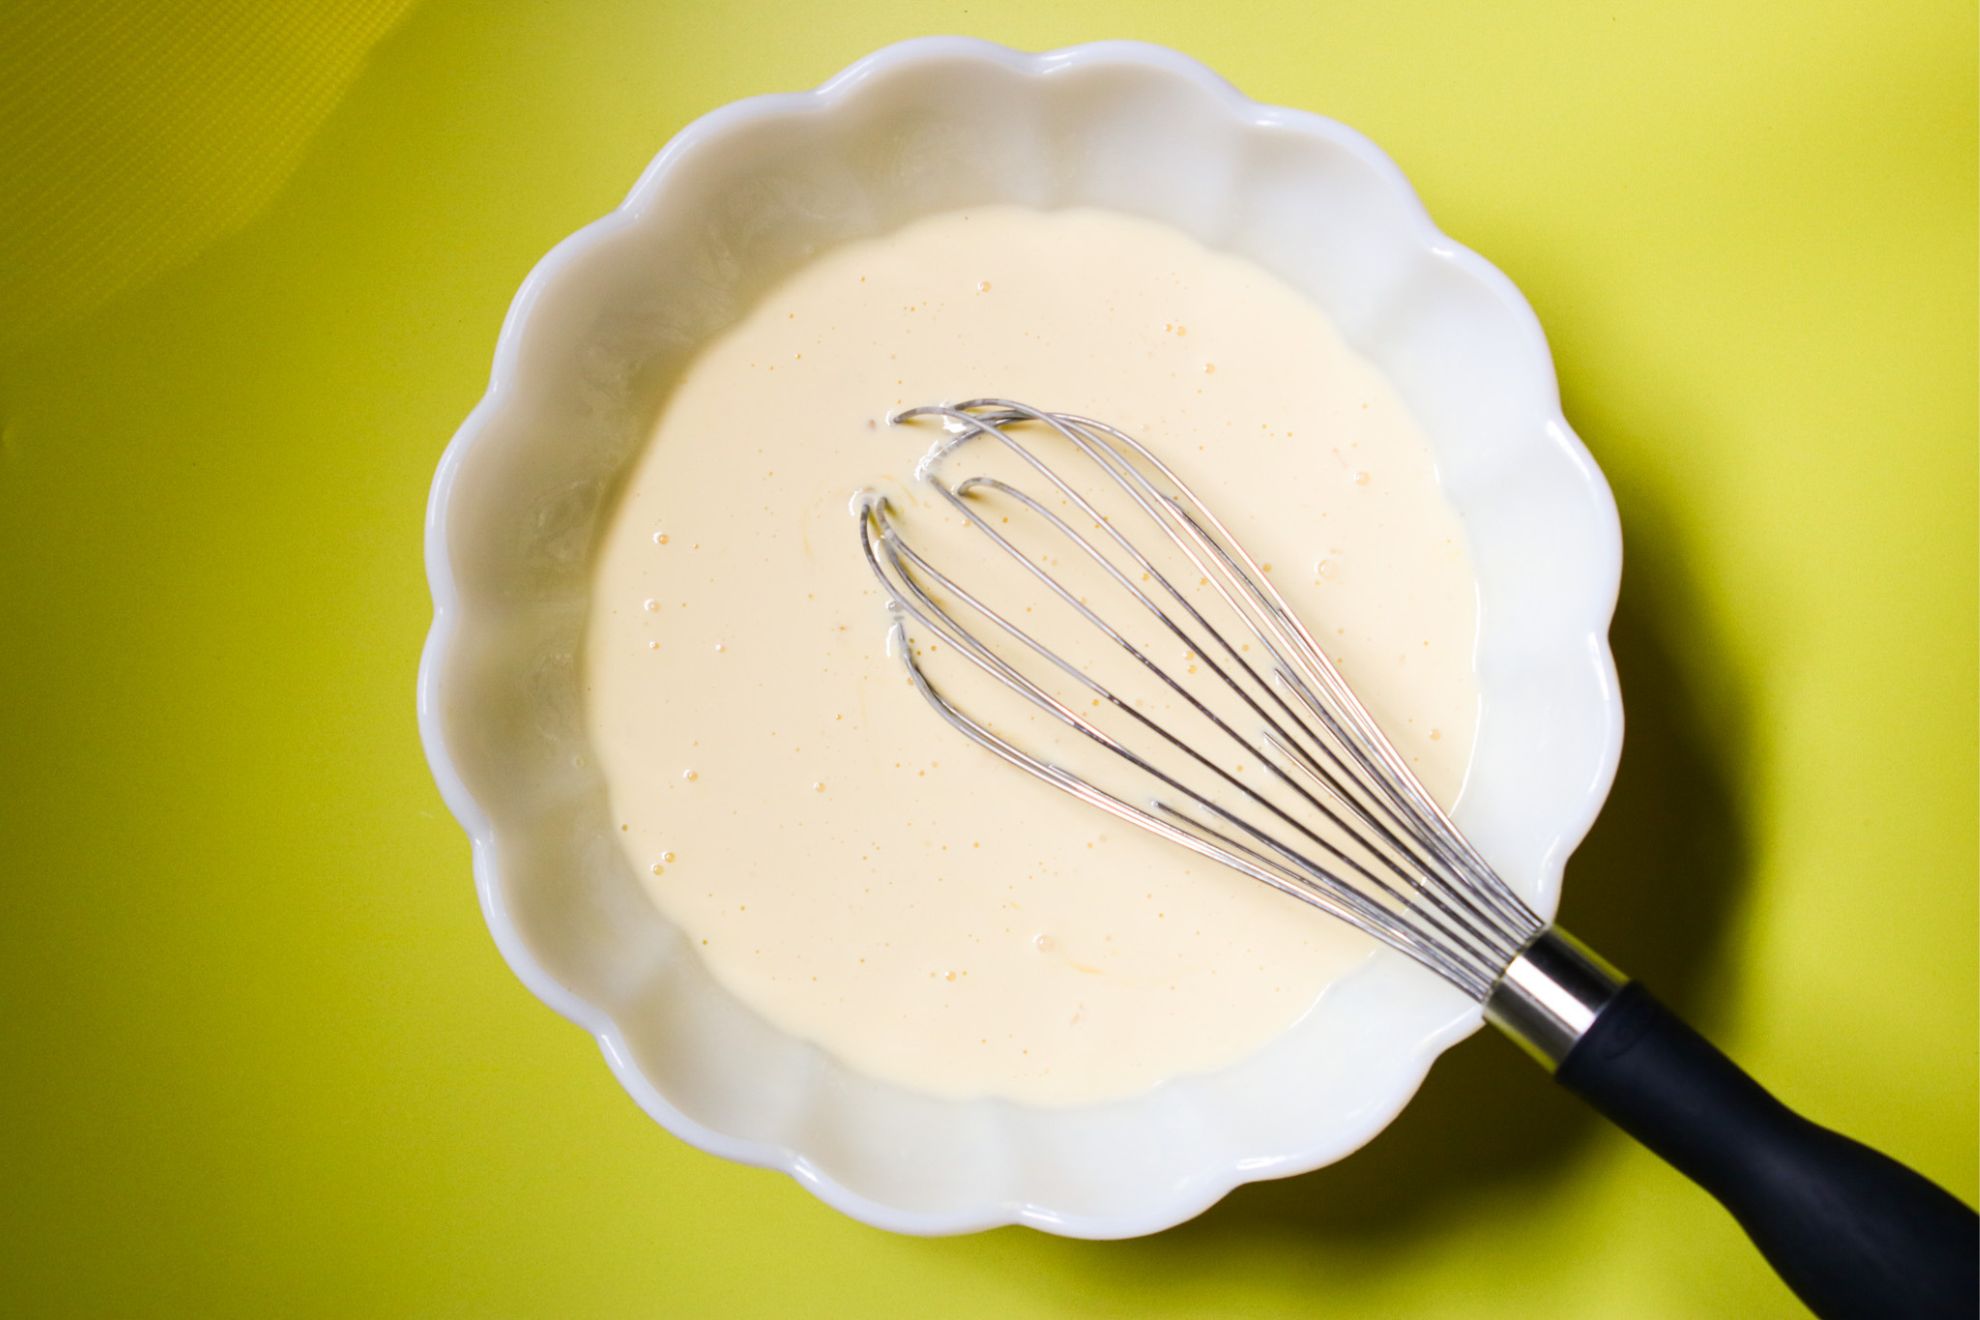 This is an overhead horizontal image of a large scalloped milk glass bowl on a yellow surface. In the bowl is a slightly yellow creamy mixture and a whisk dipped into it. The silver whisk has a black handle and is leaning against the side of the bowl pointing at the bottom right corner of the image.